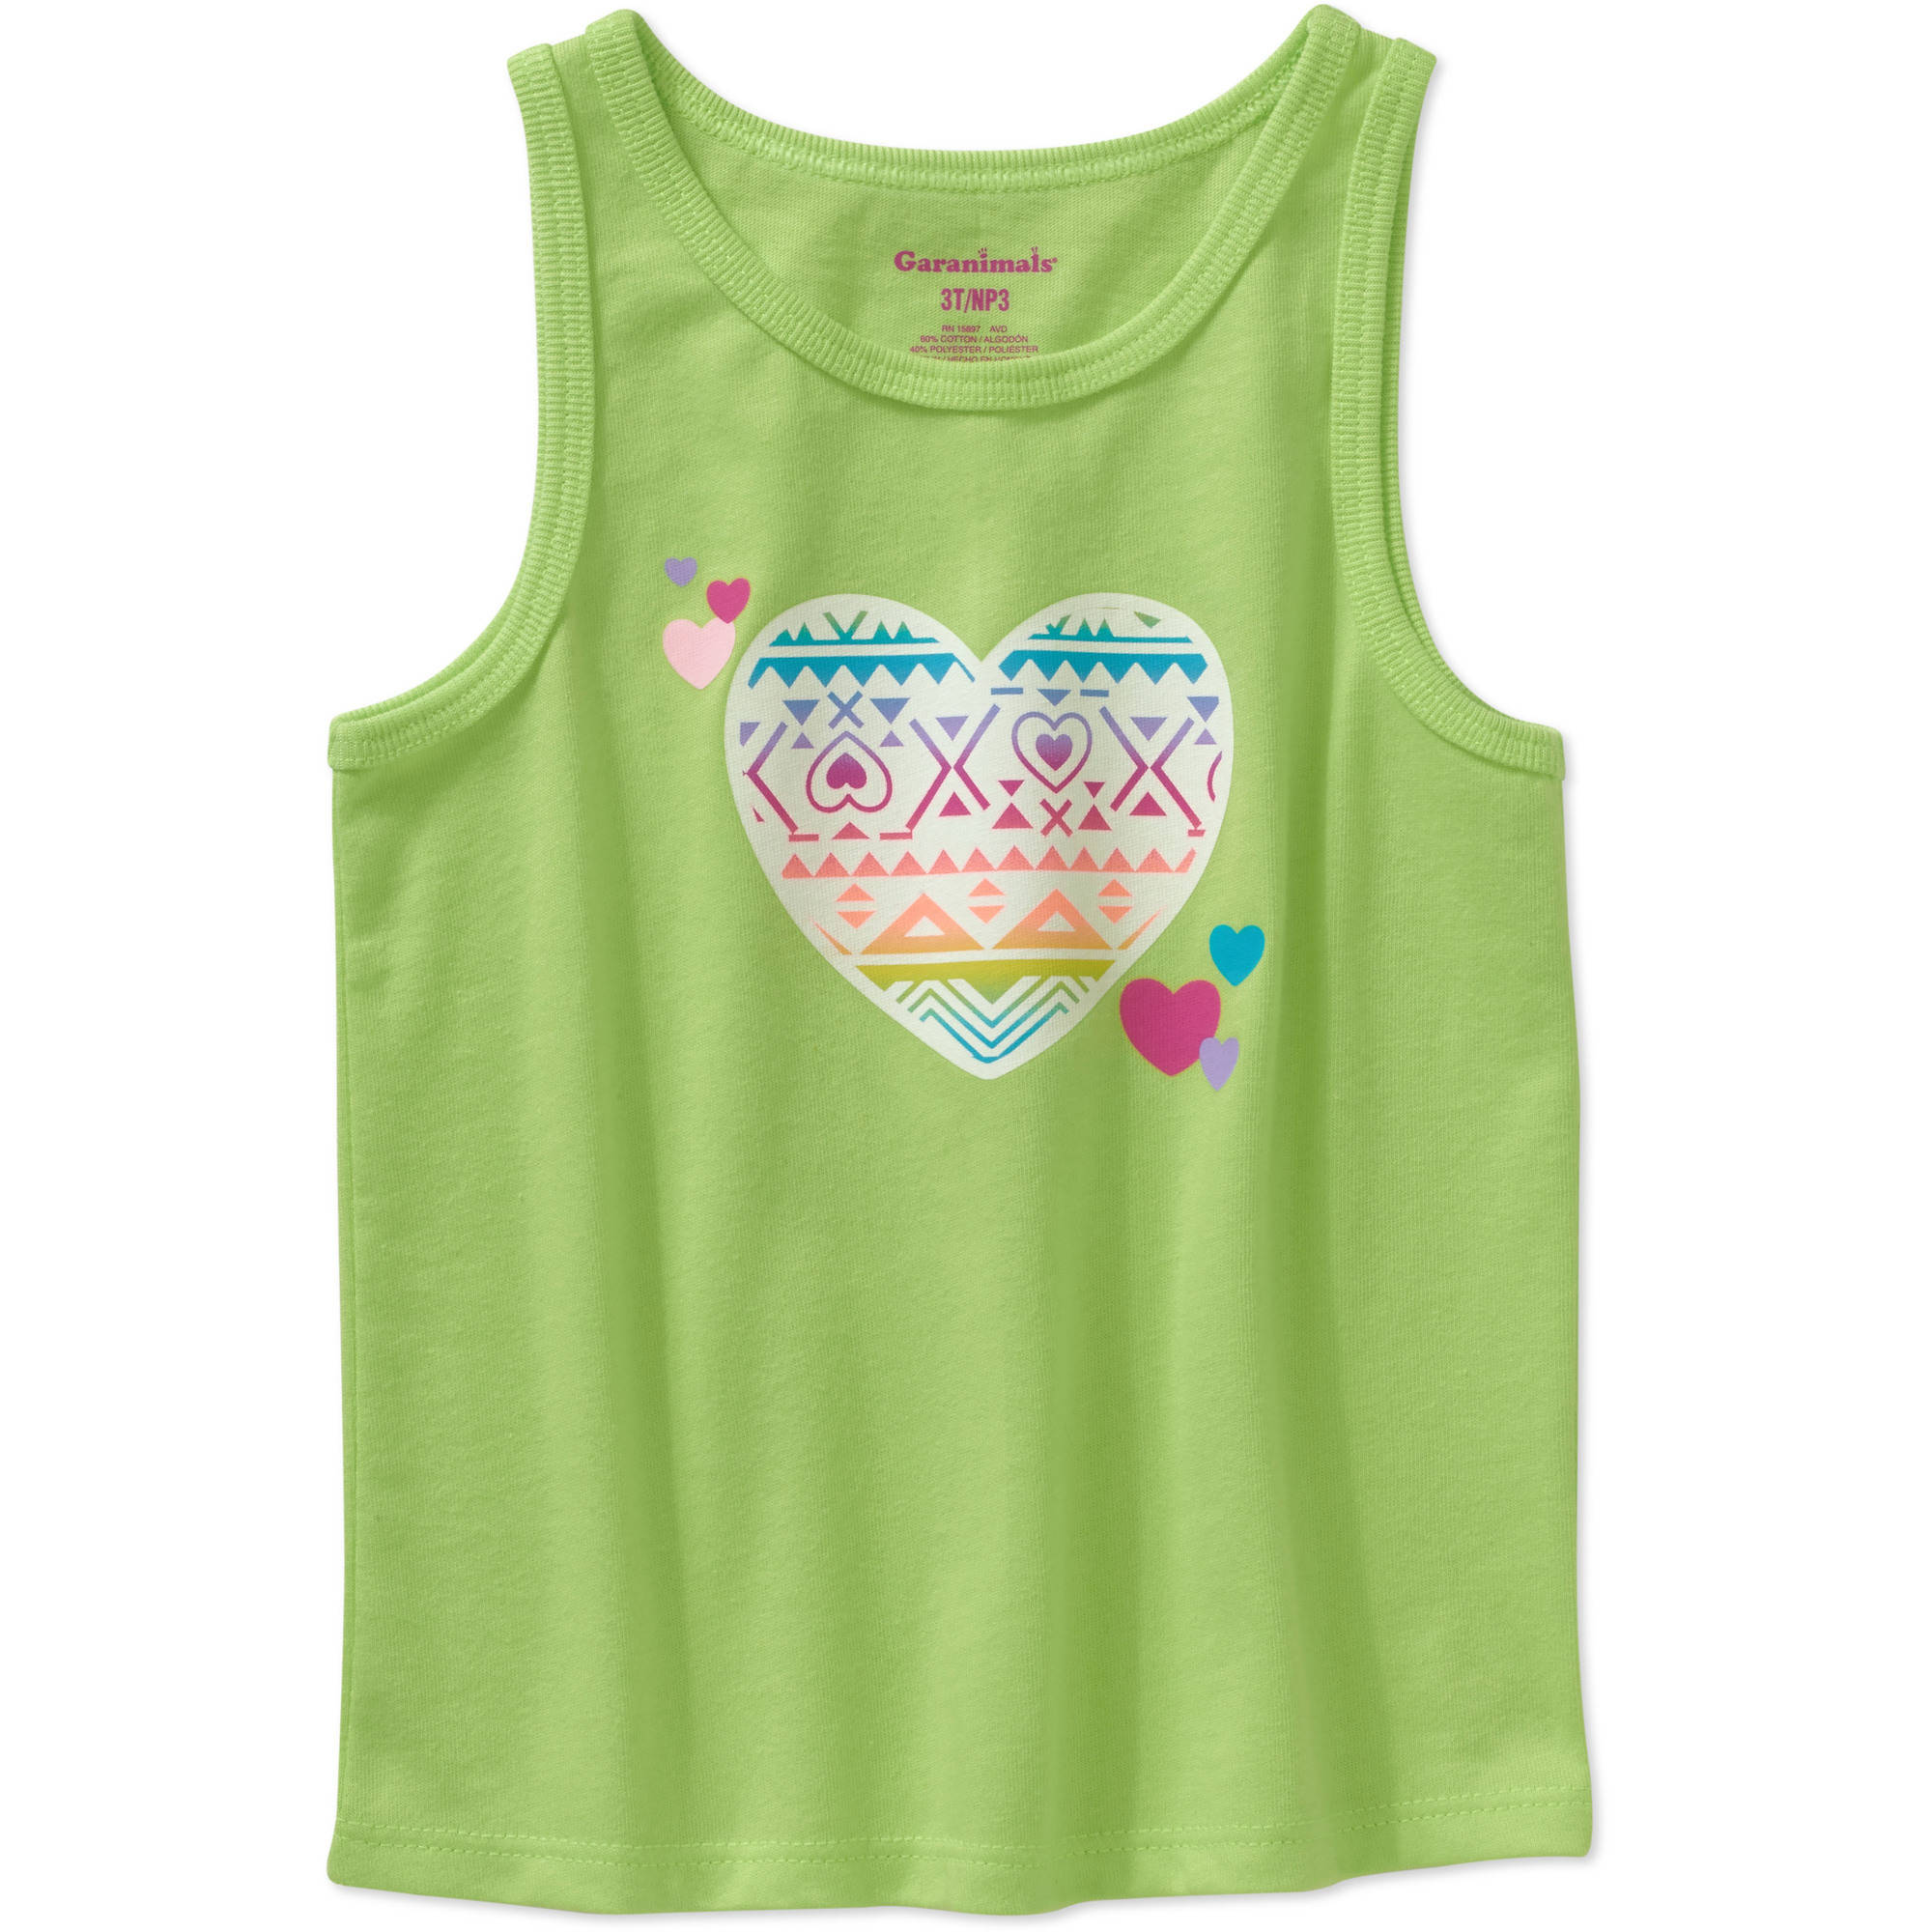 Toddler Girl Graphic Tank Top - image 1 of 2